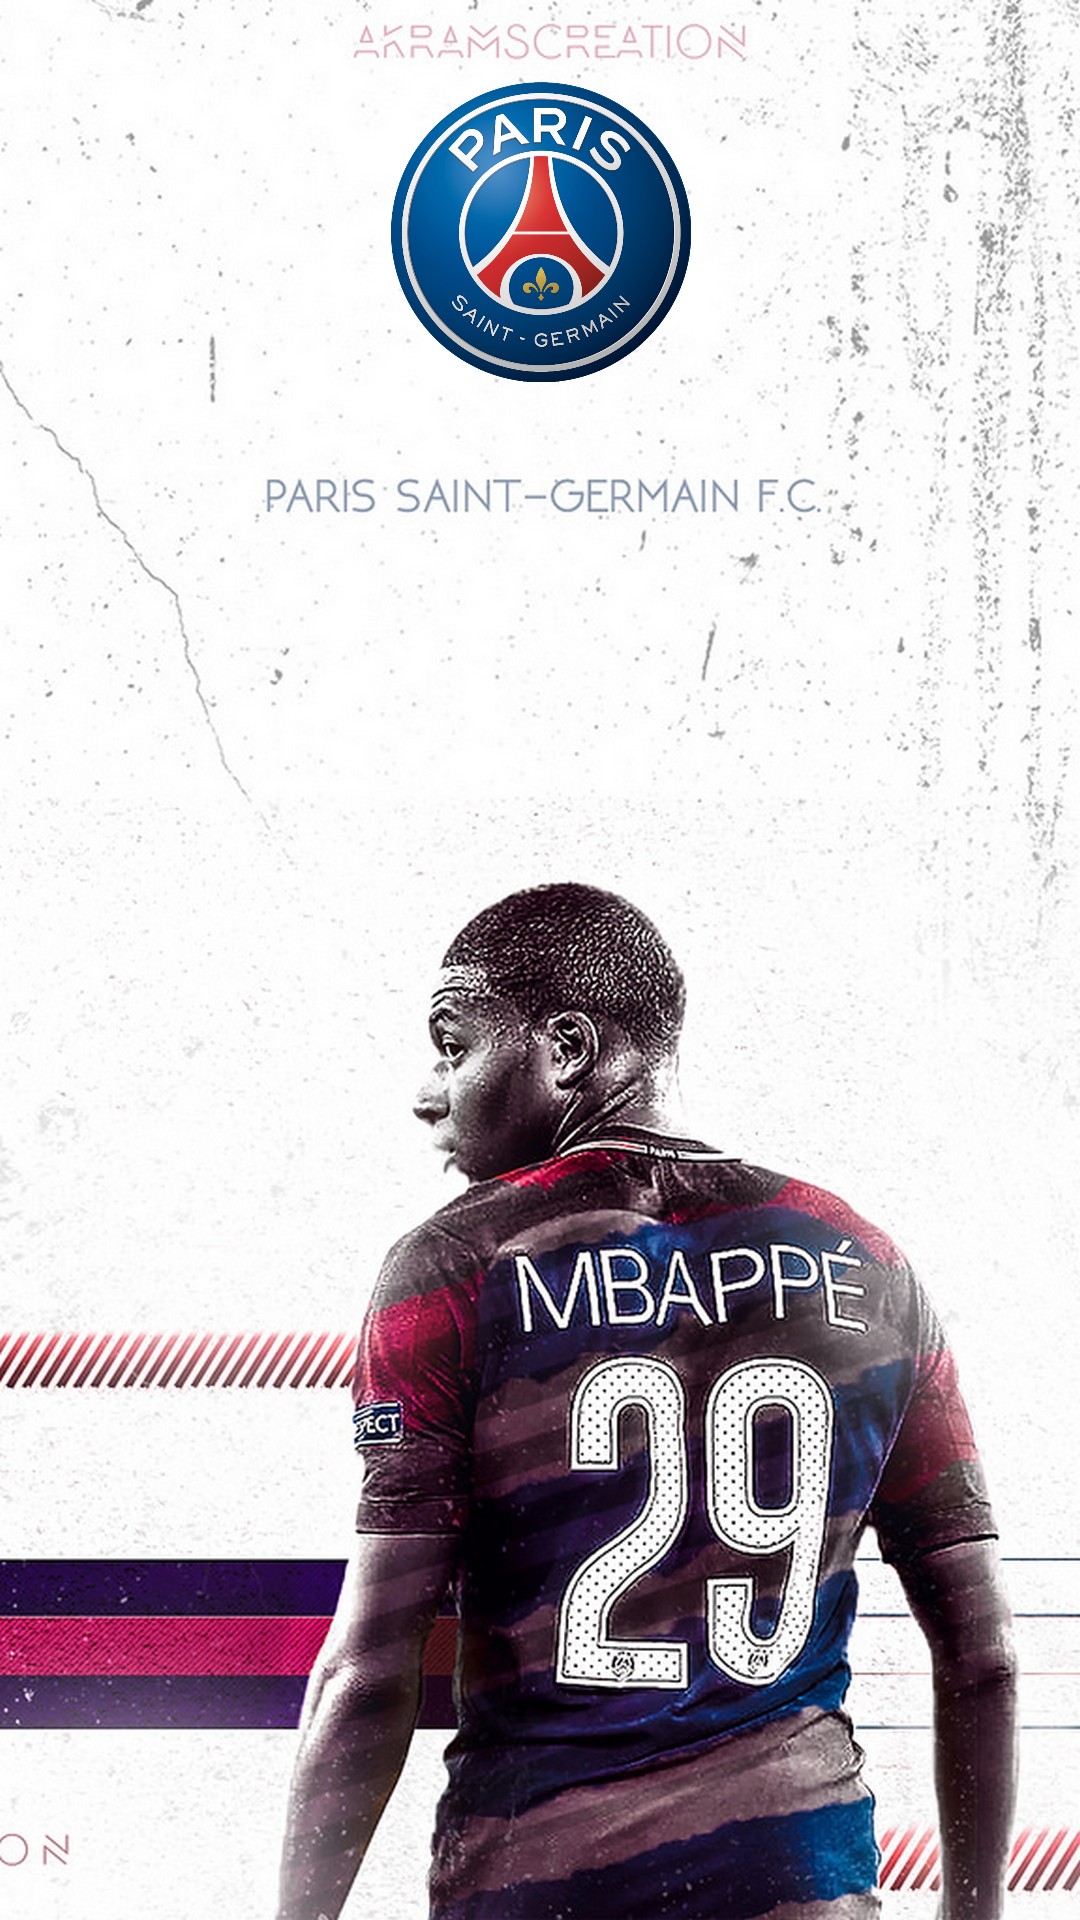 Kylian Mbappe PSG HD Wallpaper For iPhone With Resolution 1080X1920 pixel. You can make this wallpaper for your Mac or Windows Desktop Background, iPhone, Android or Tablet and another Smartphone device for free